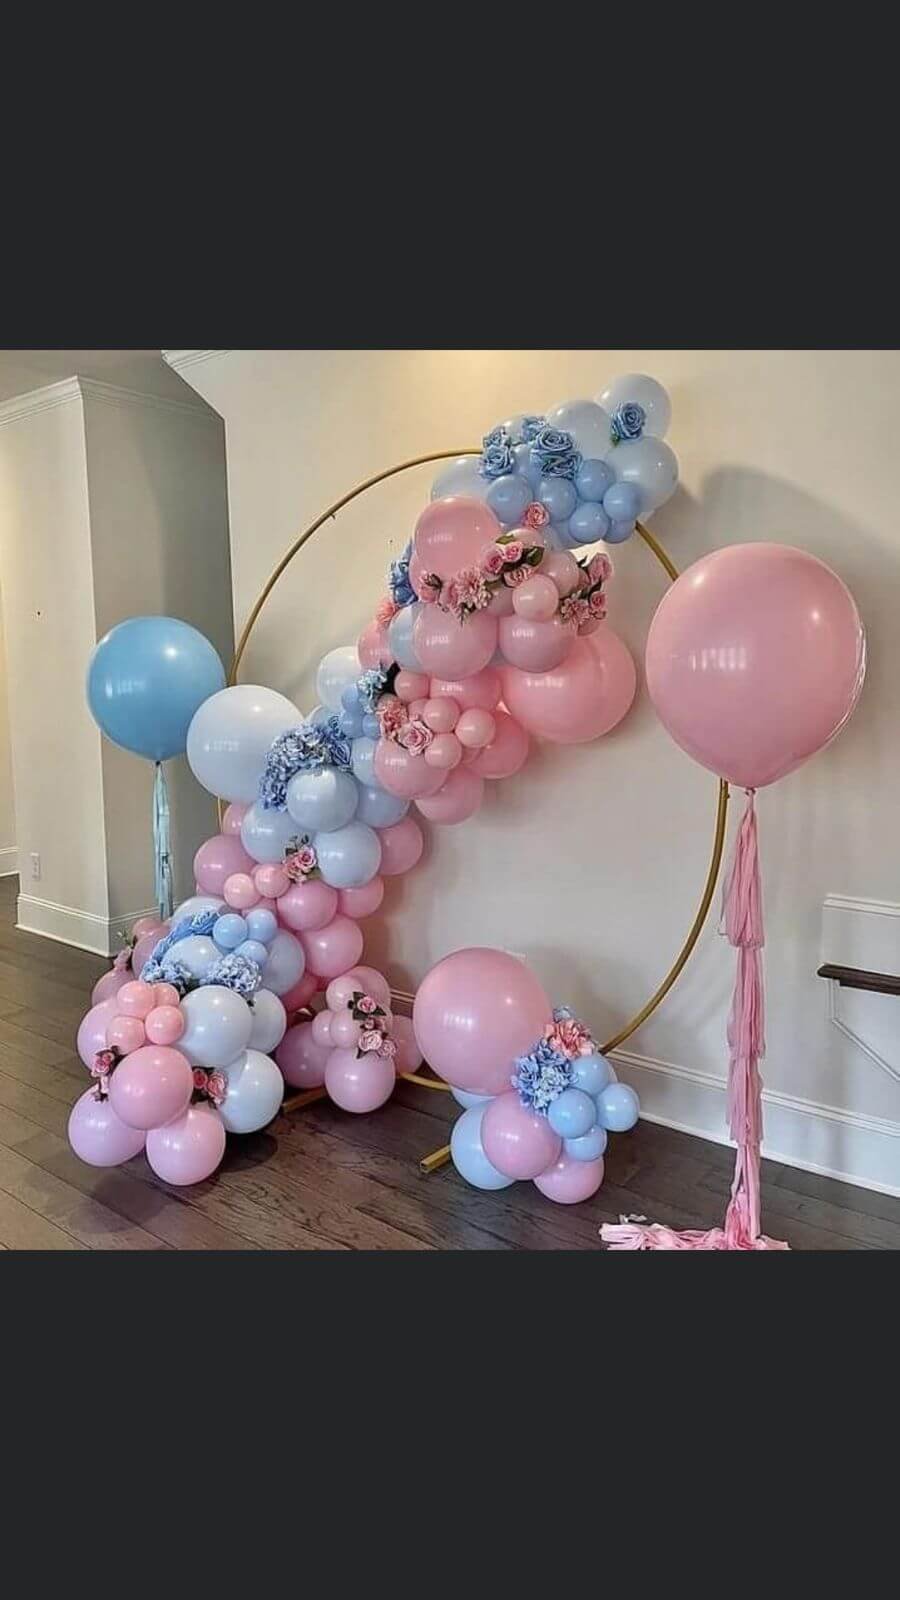 rose,white and blue themed birthday decorative balloons